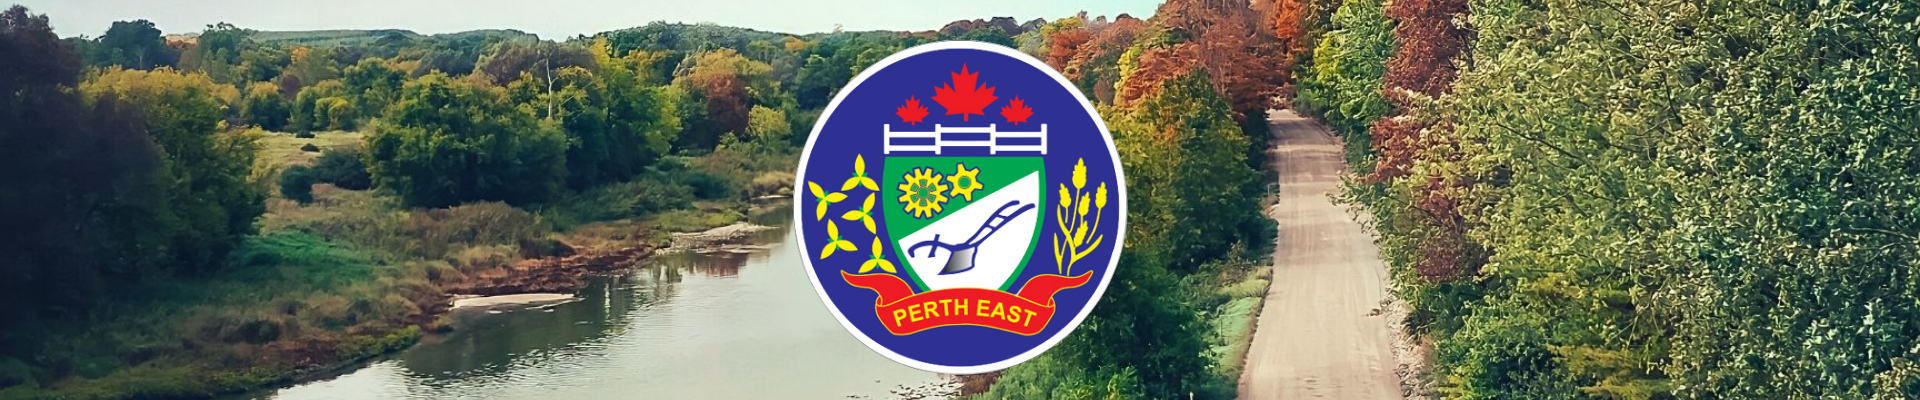 meet your perth east banner